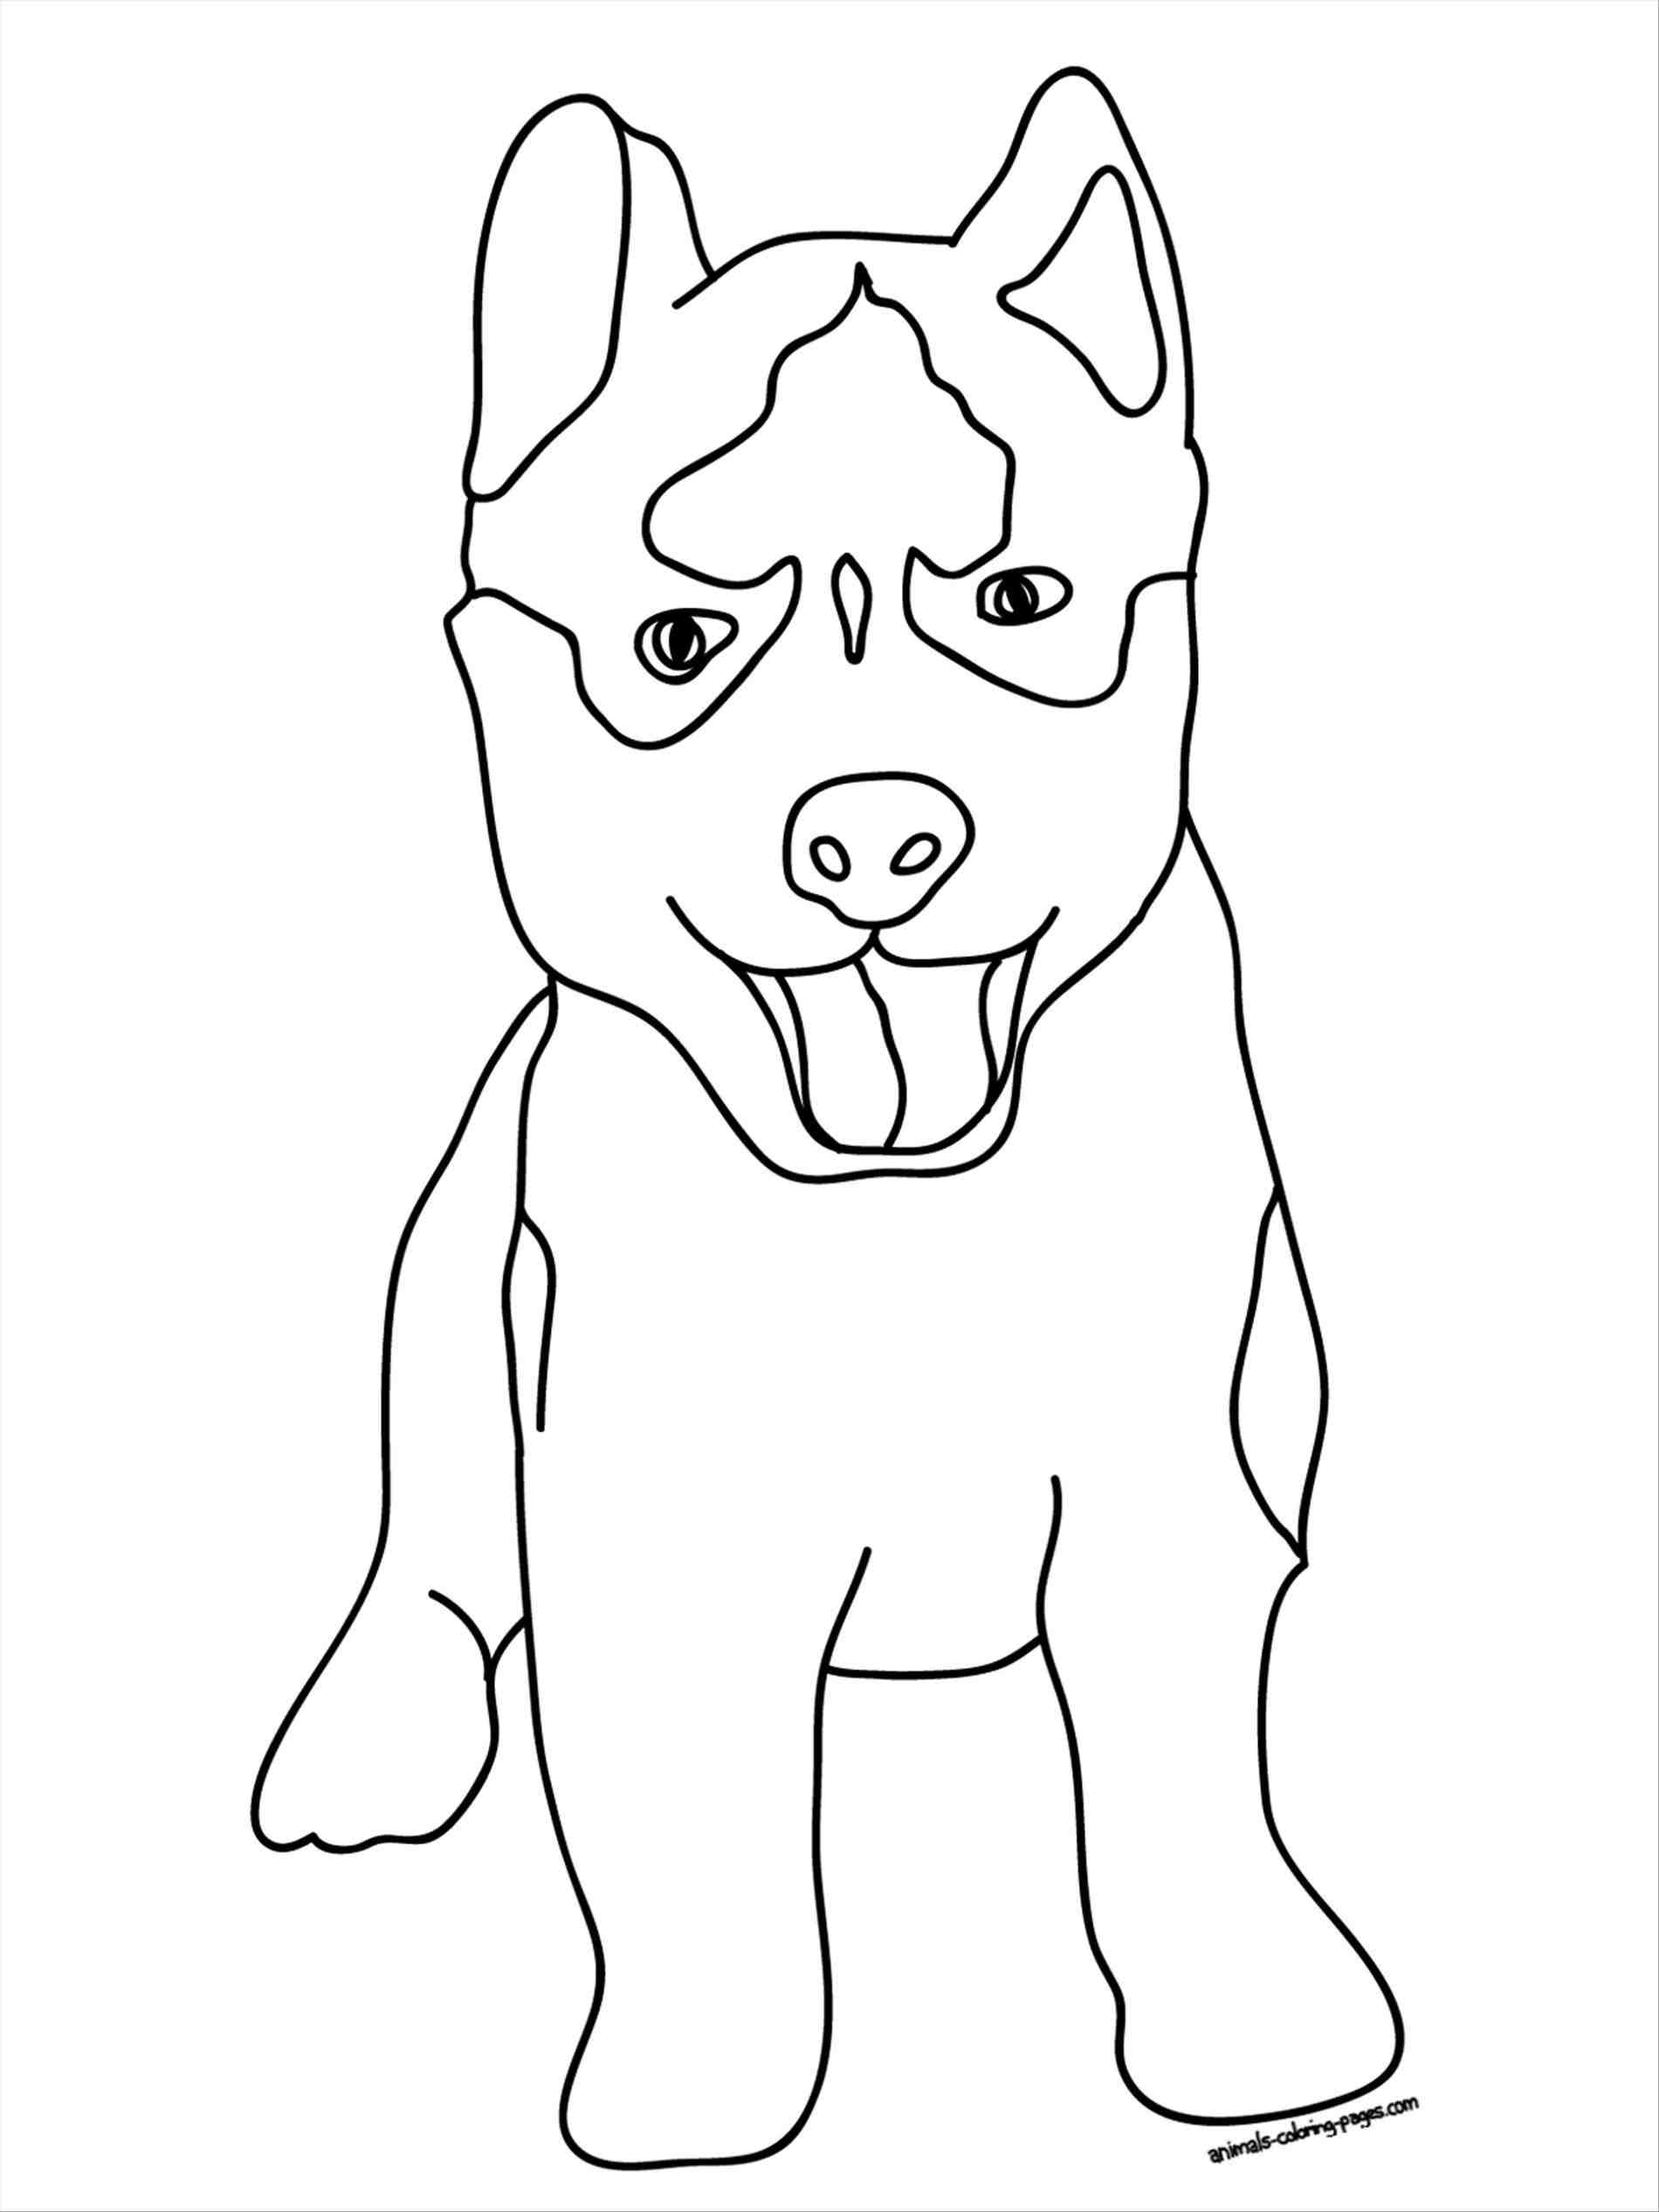 Shiba Inu Coloring Pages at GetColorings.com | Free printable colorings